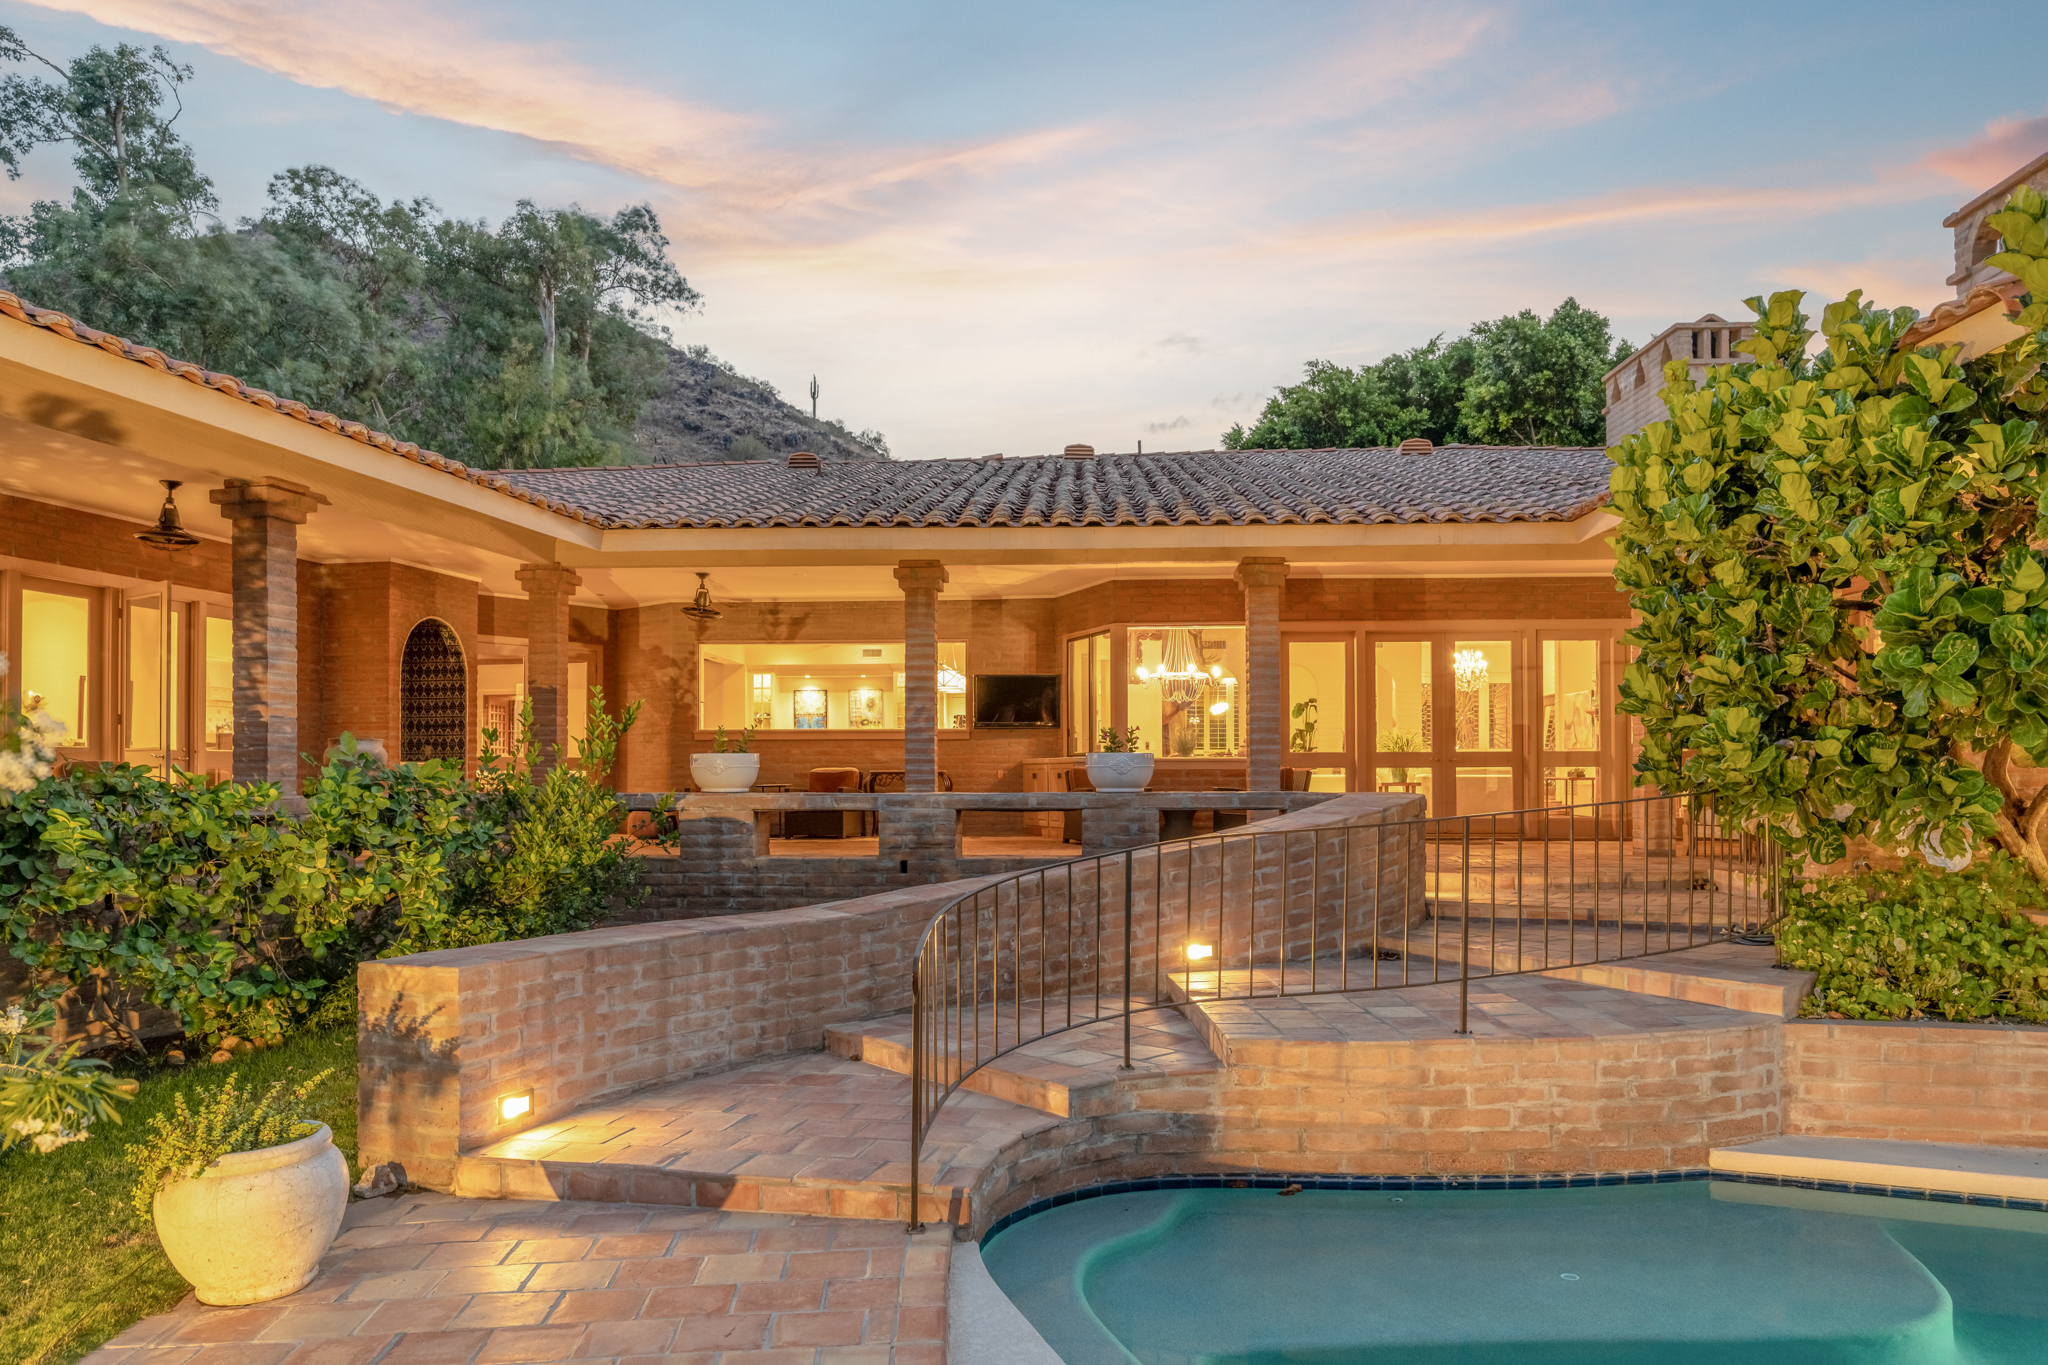 SOLD FOR OVER ASKING  –  Stunning Entertainer’s Home in Paradise Valley